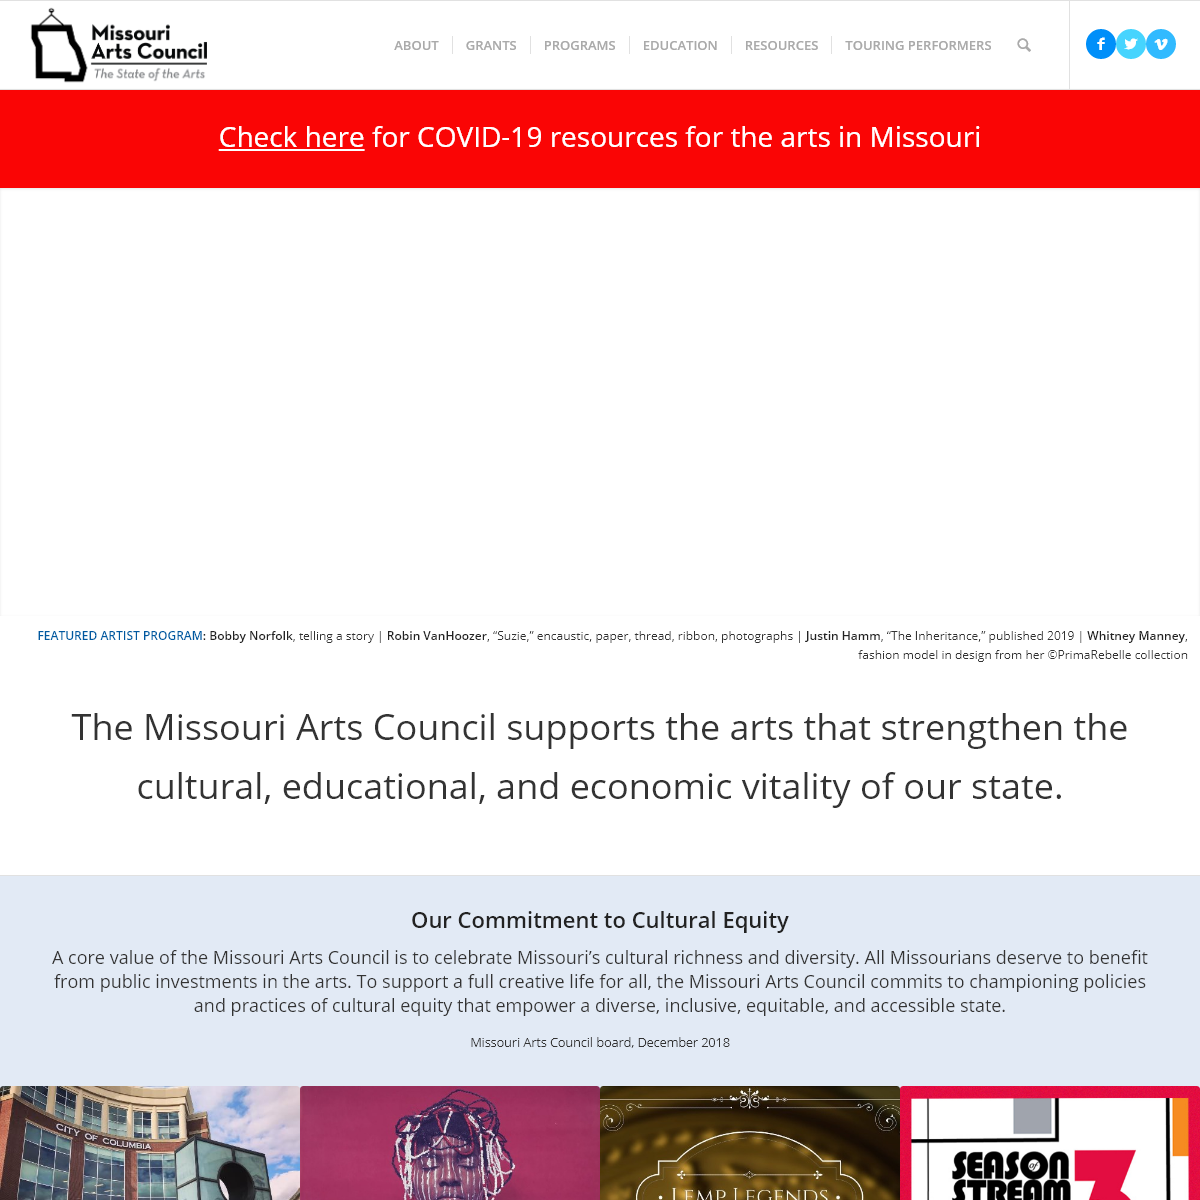 A complete backup of missouriartscouncil.org